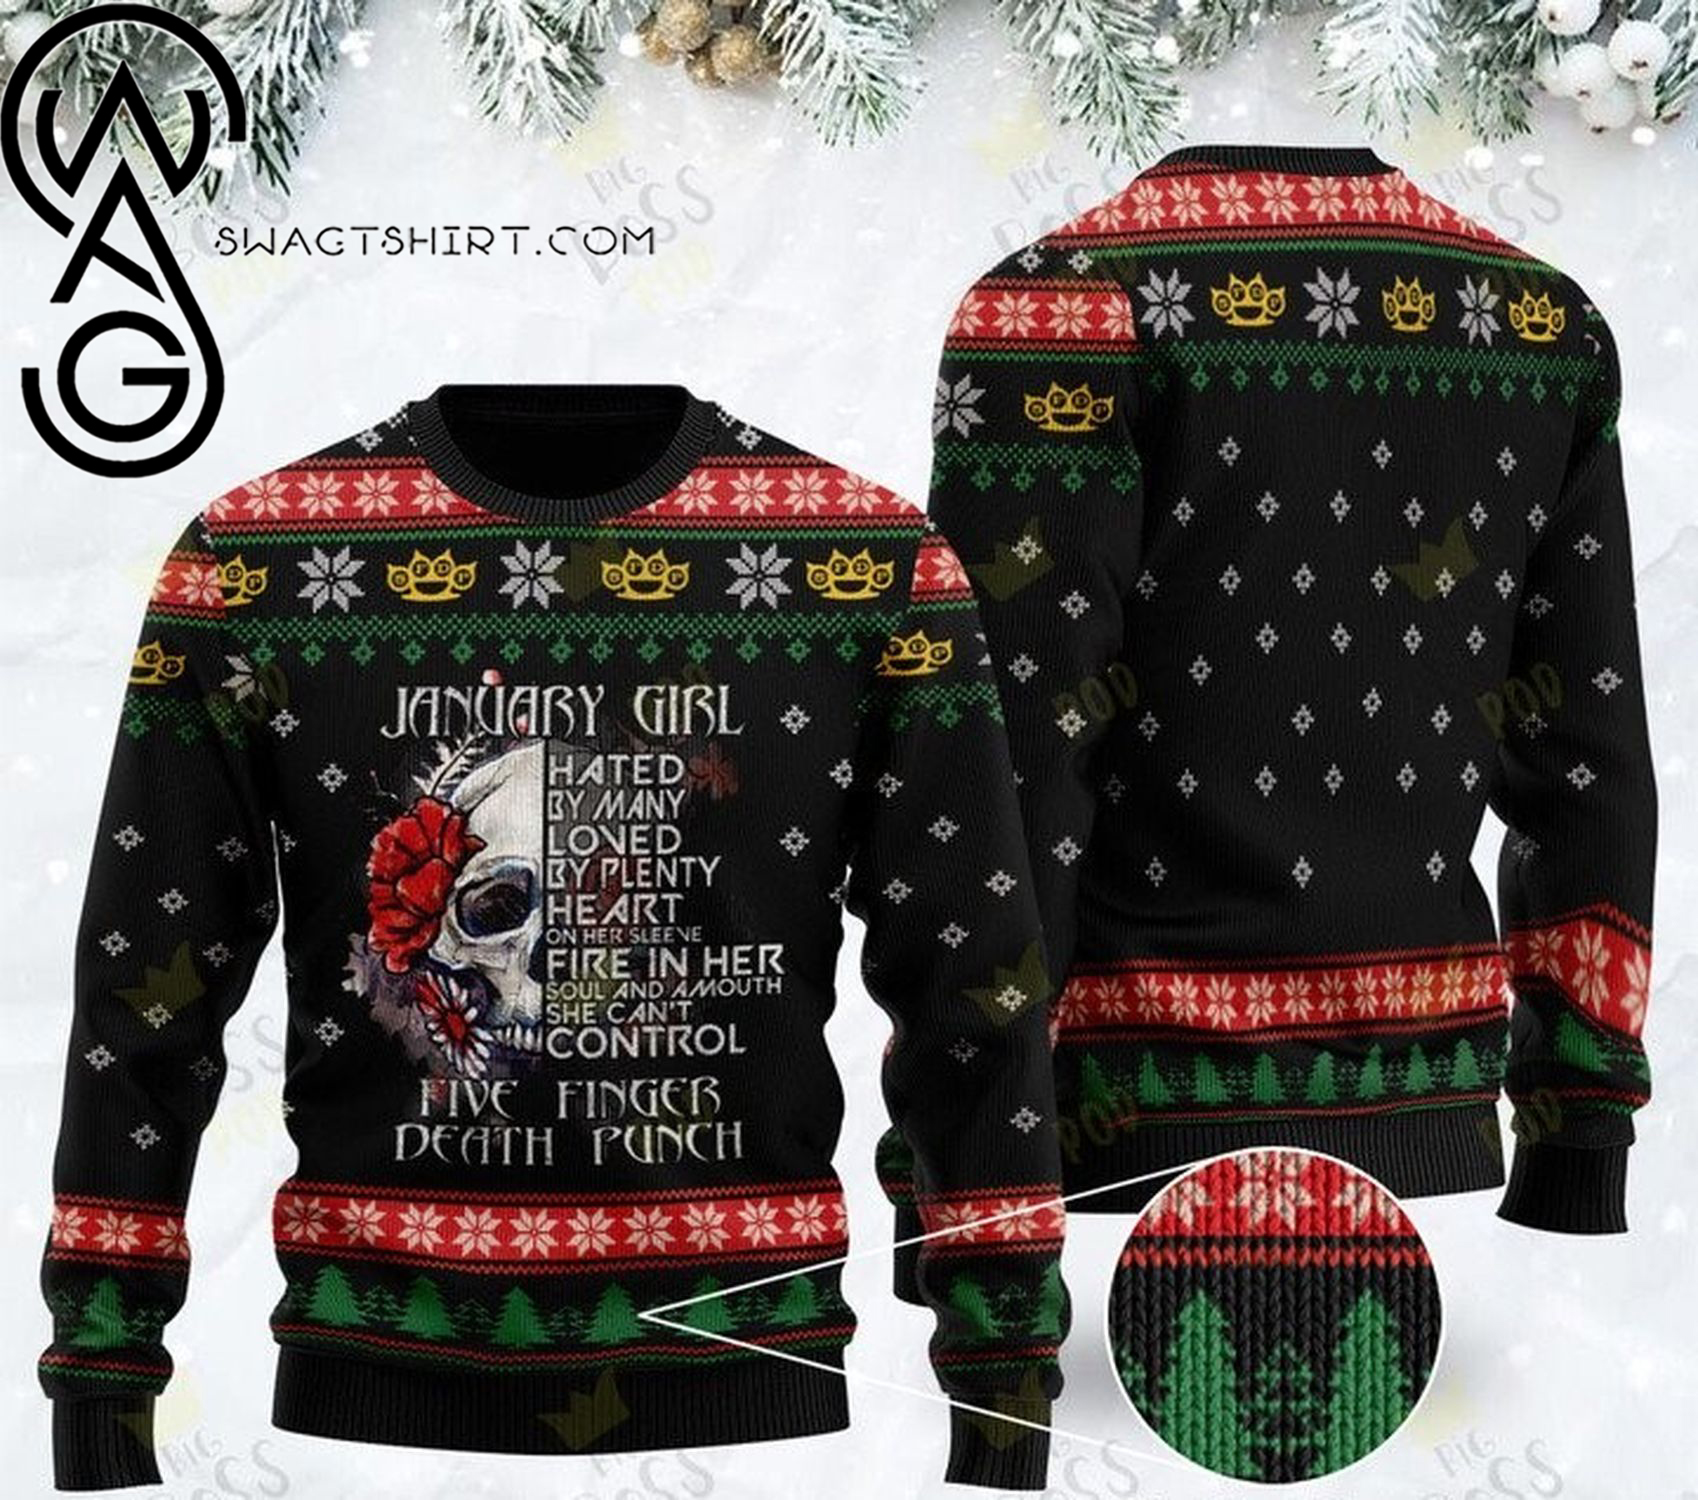 January girl five finger death punch ugly christmas sweater - Copy (3)